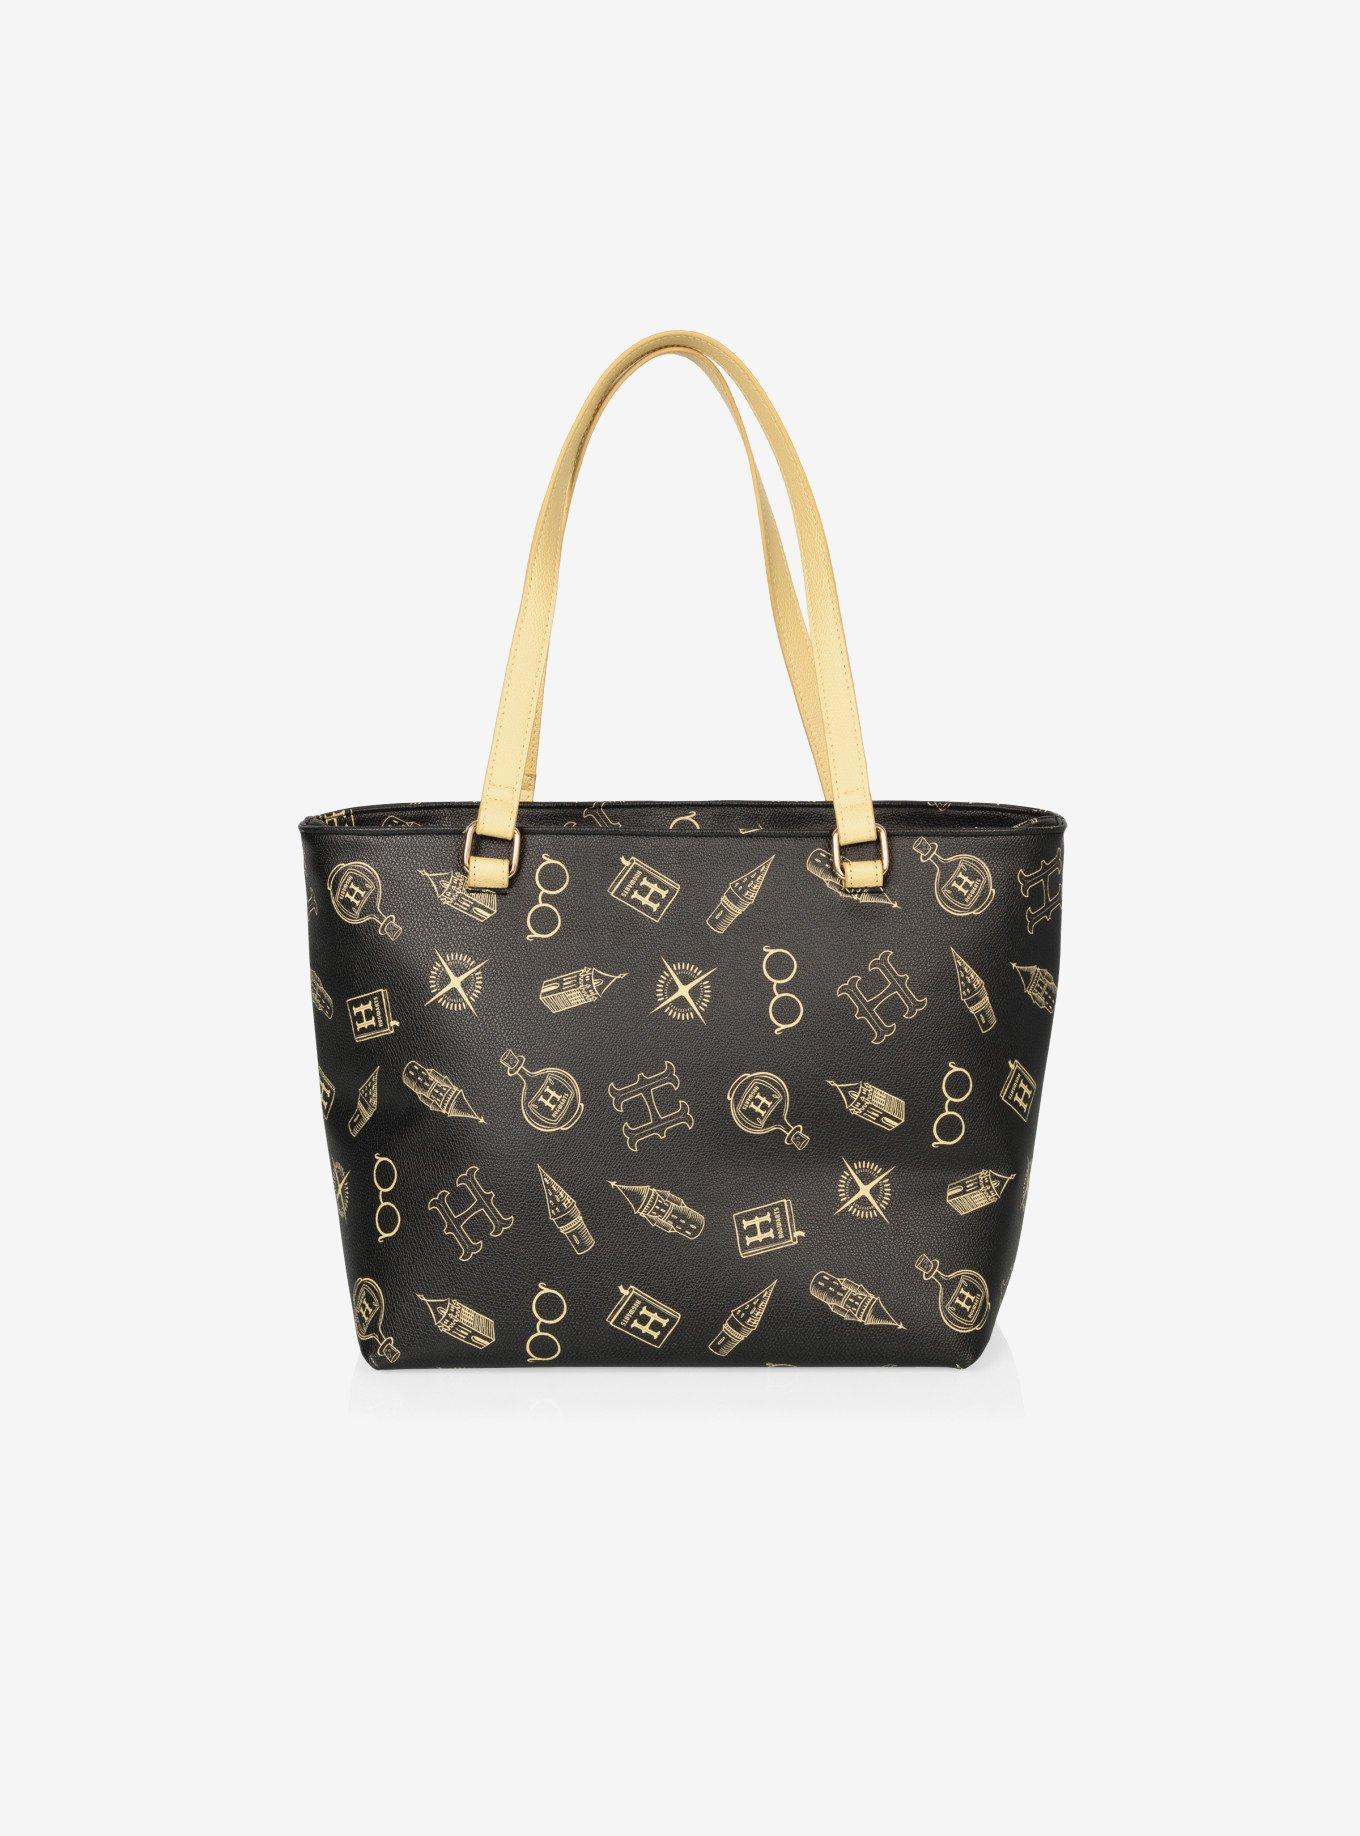 Personalized Louis Vuitton Monogram Snoopy Pullover Hoodie